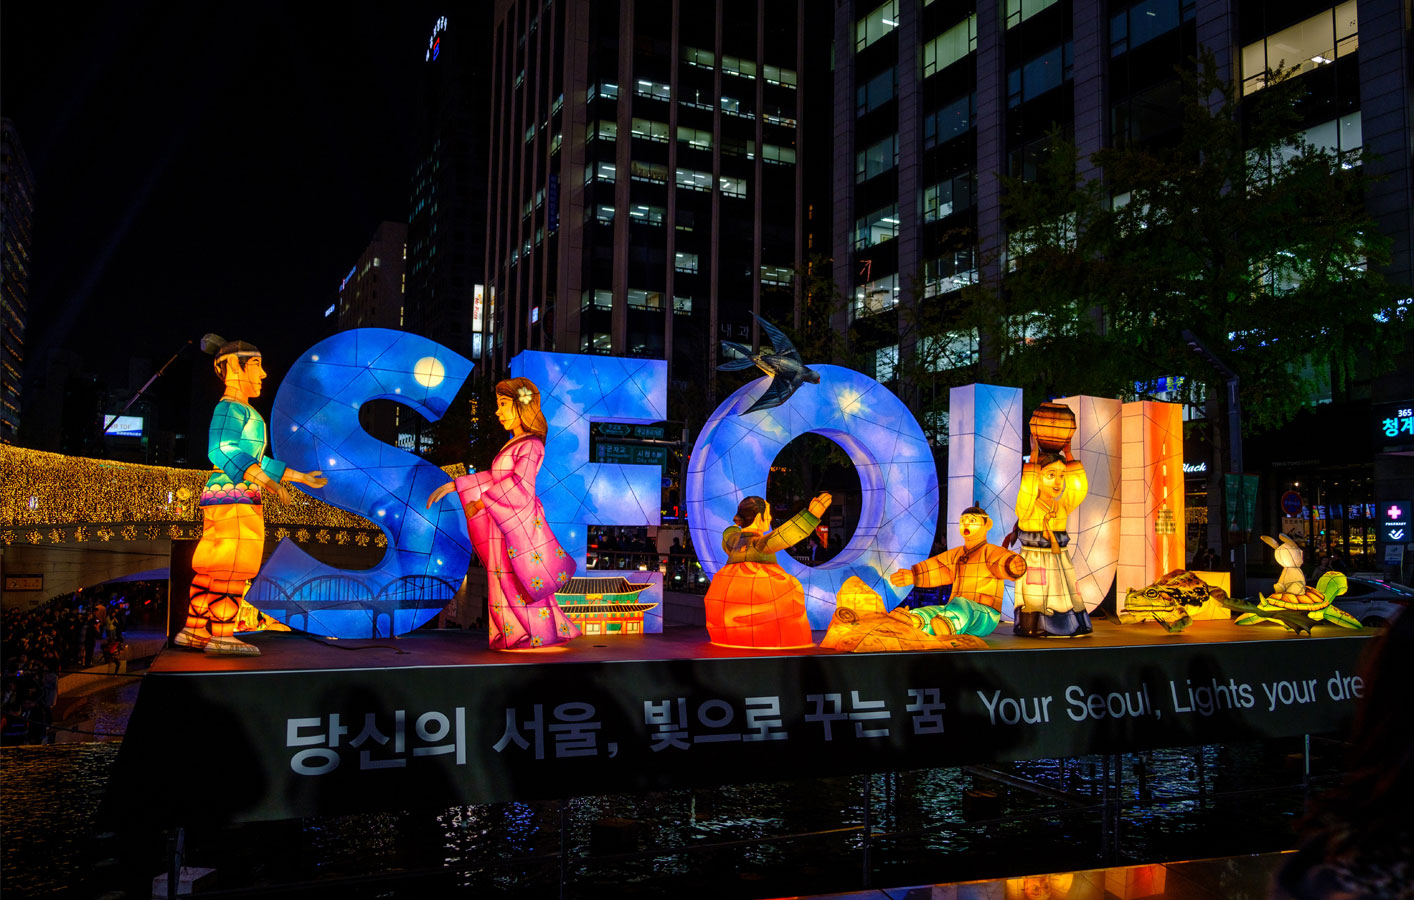 disguise opens office in South Korea to better serve one of its fastest growing markets